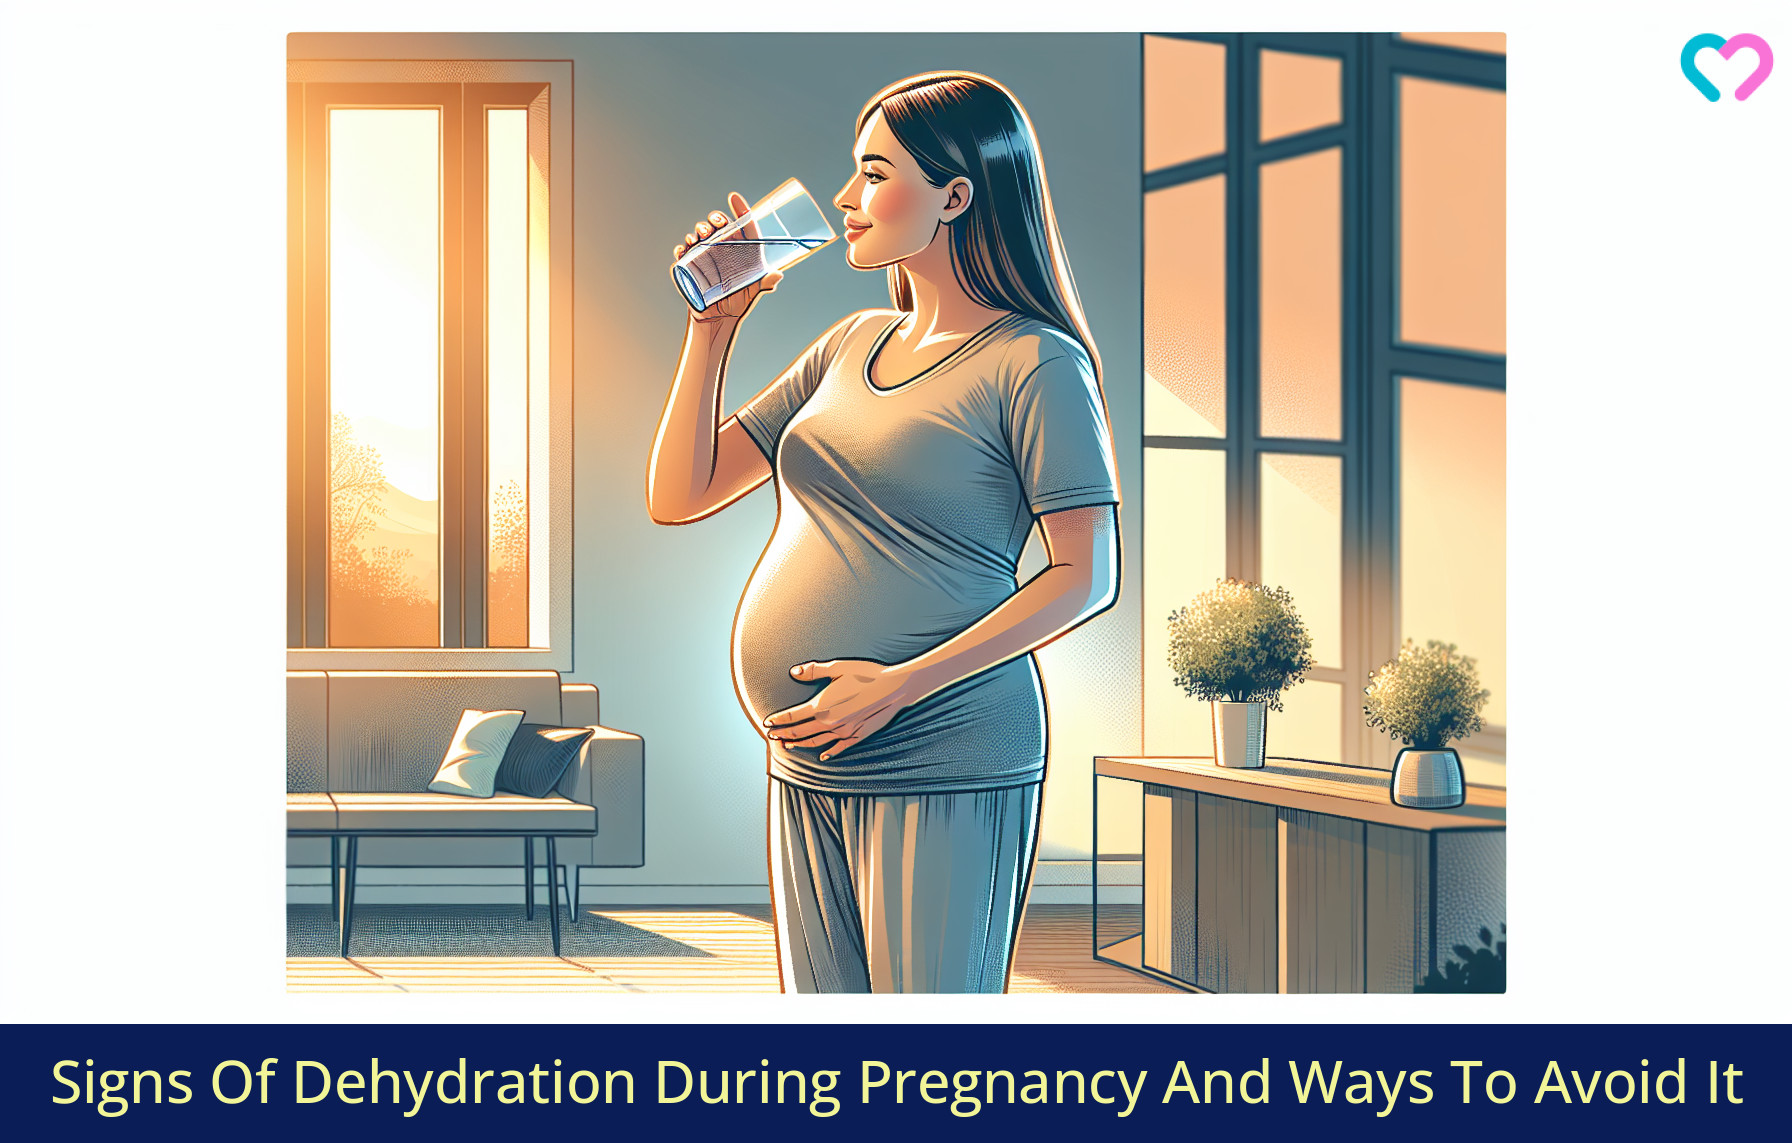 signs of dehydration in pregnancy_illustration